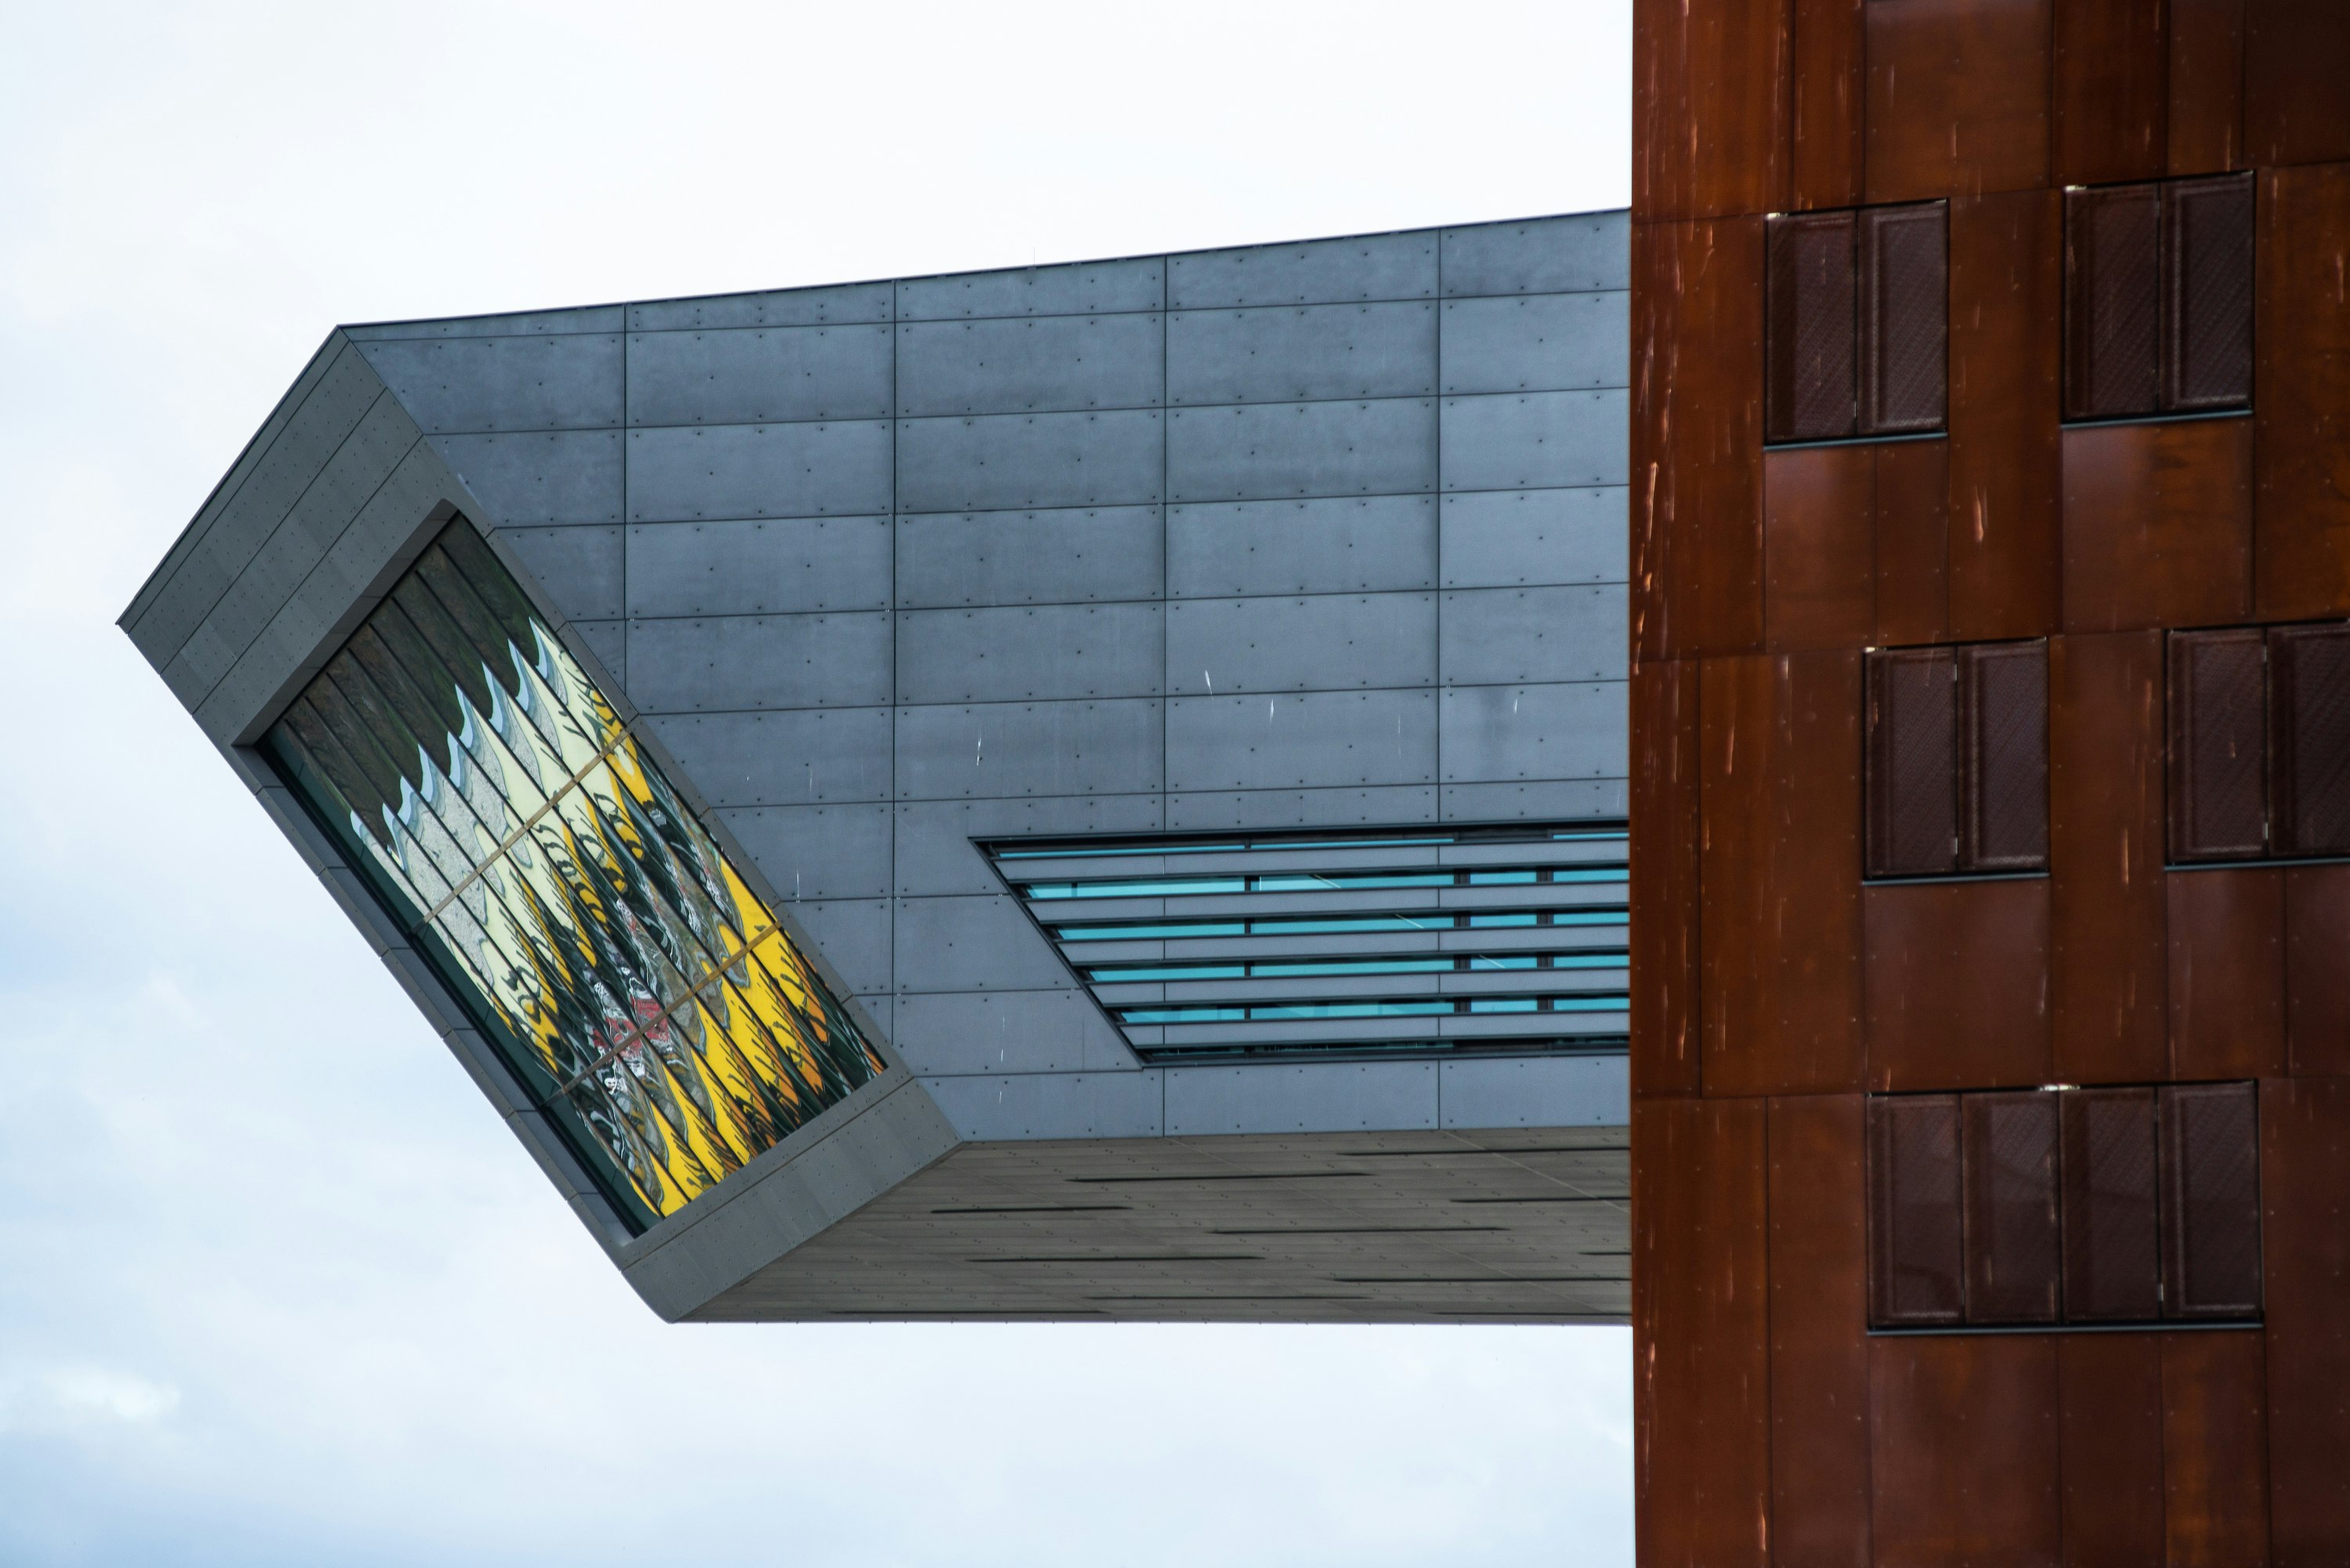 A grey modernist cantilevered wing of the library at the Vienna University of Economics hangs from a brown structure and ends in with a rectangular glass wall of windows at the end, angled down towards the ground below, reflecting colors ranging from light blue to yellow